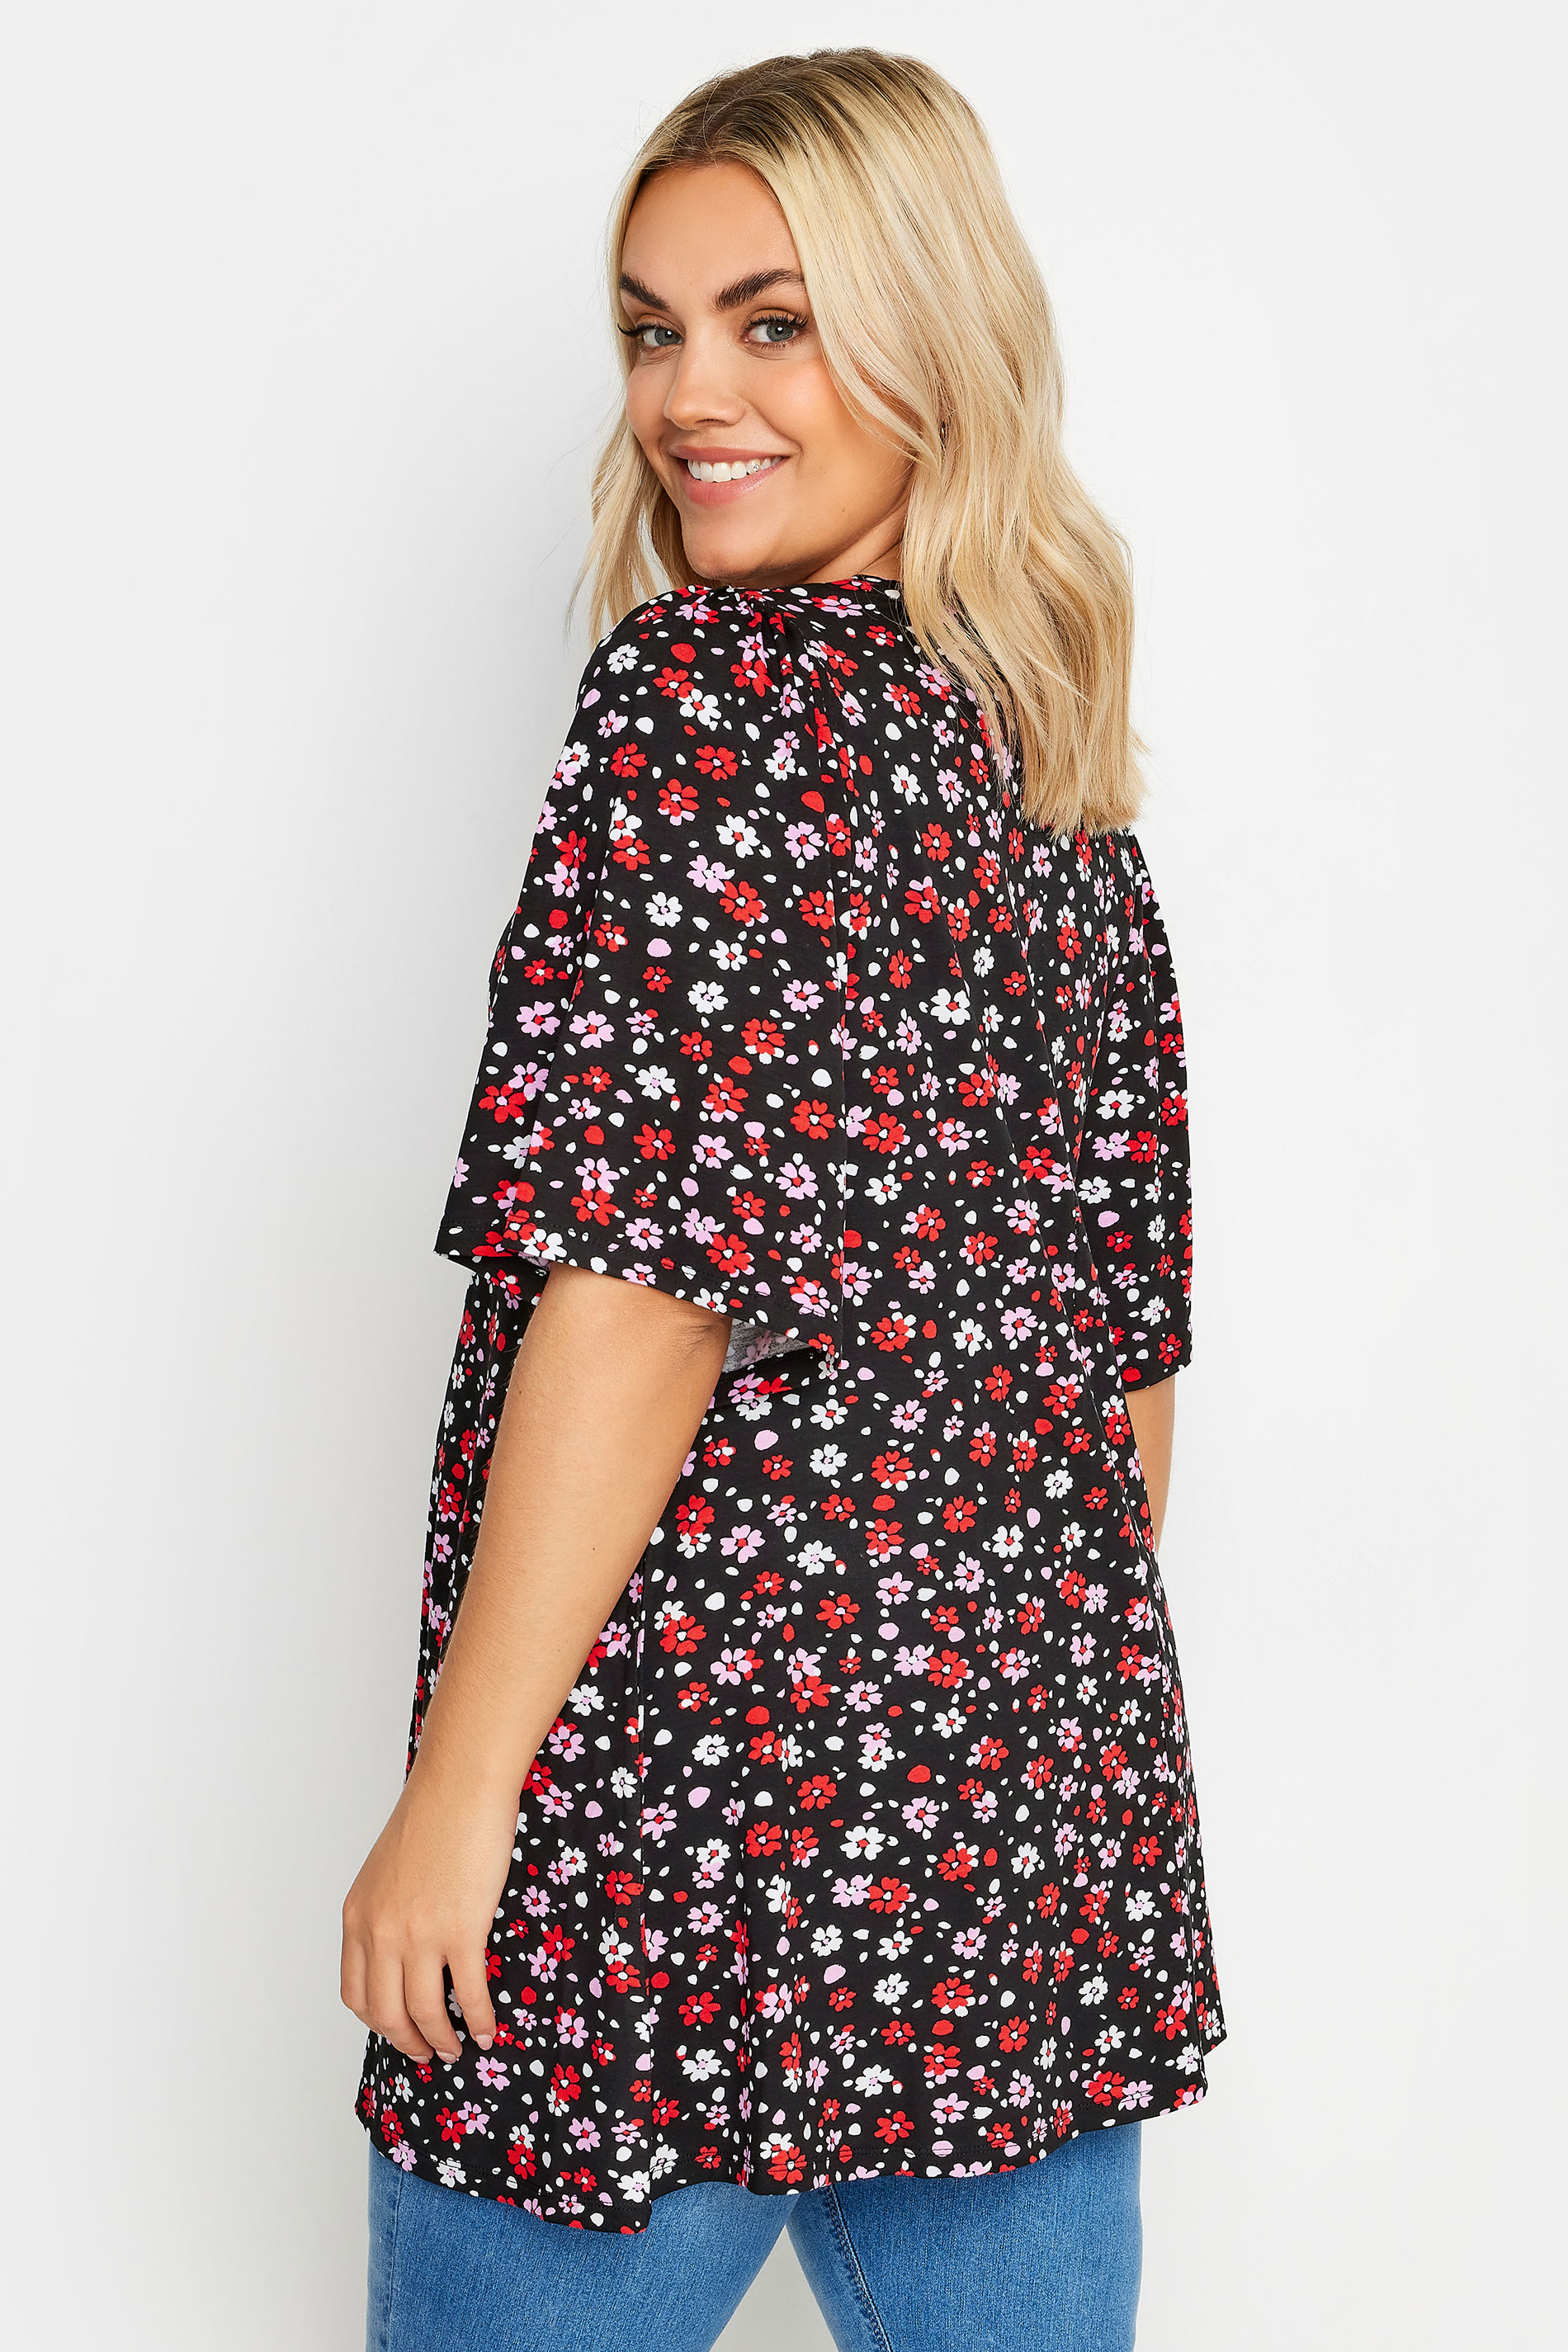 YOURS Plus Size Black Floral Pleated Swing Top | Yours Clothing  3